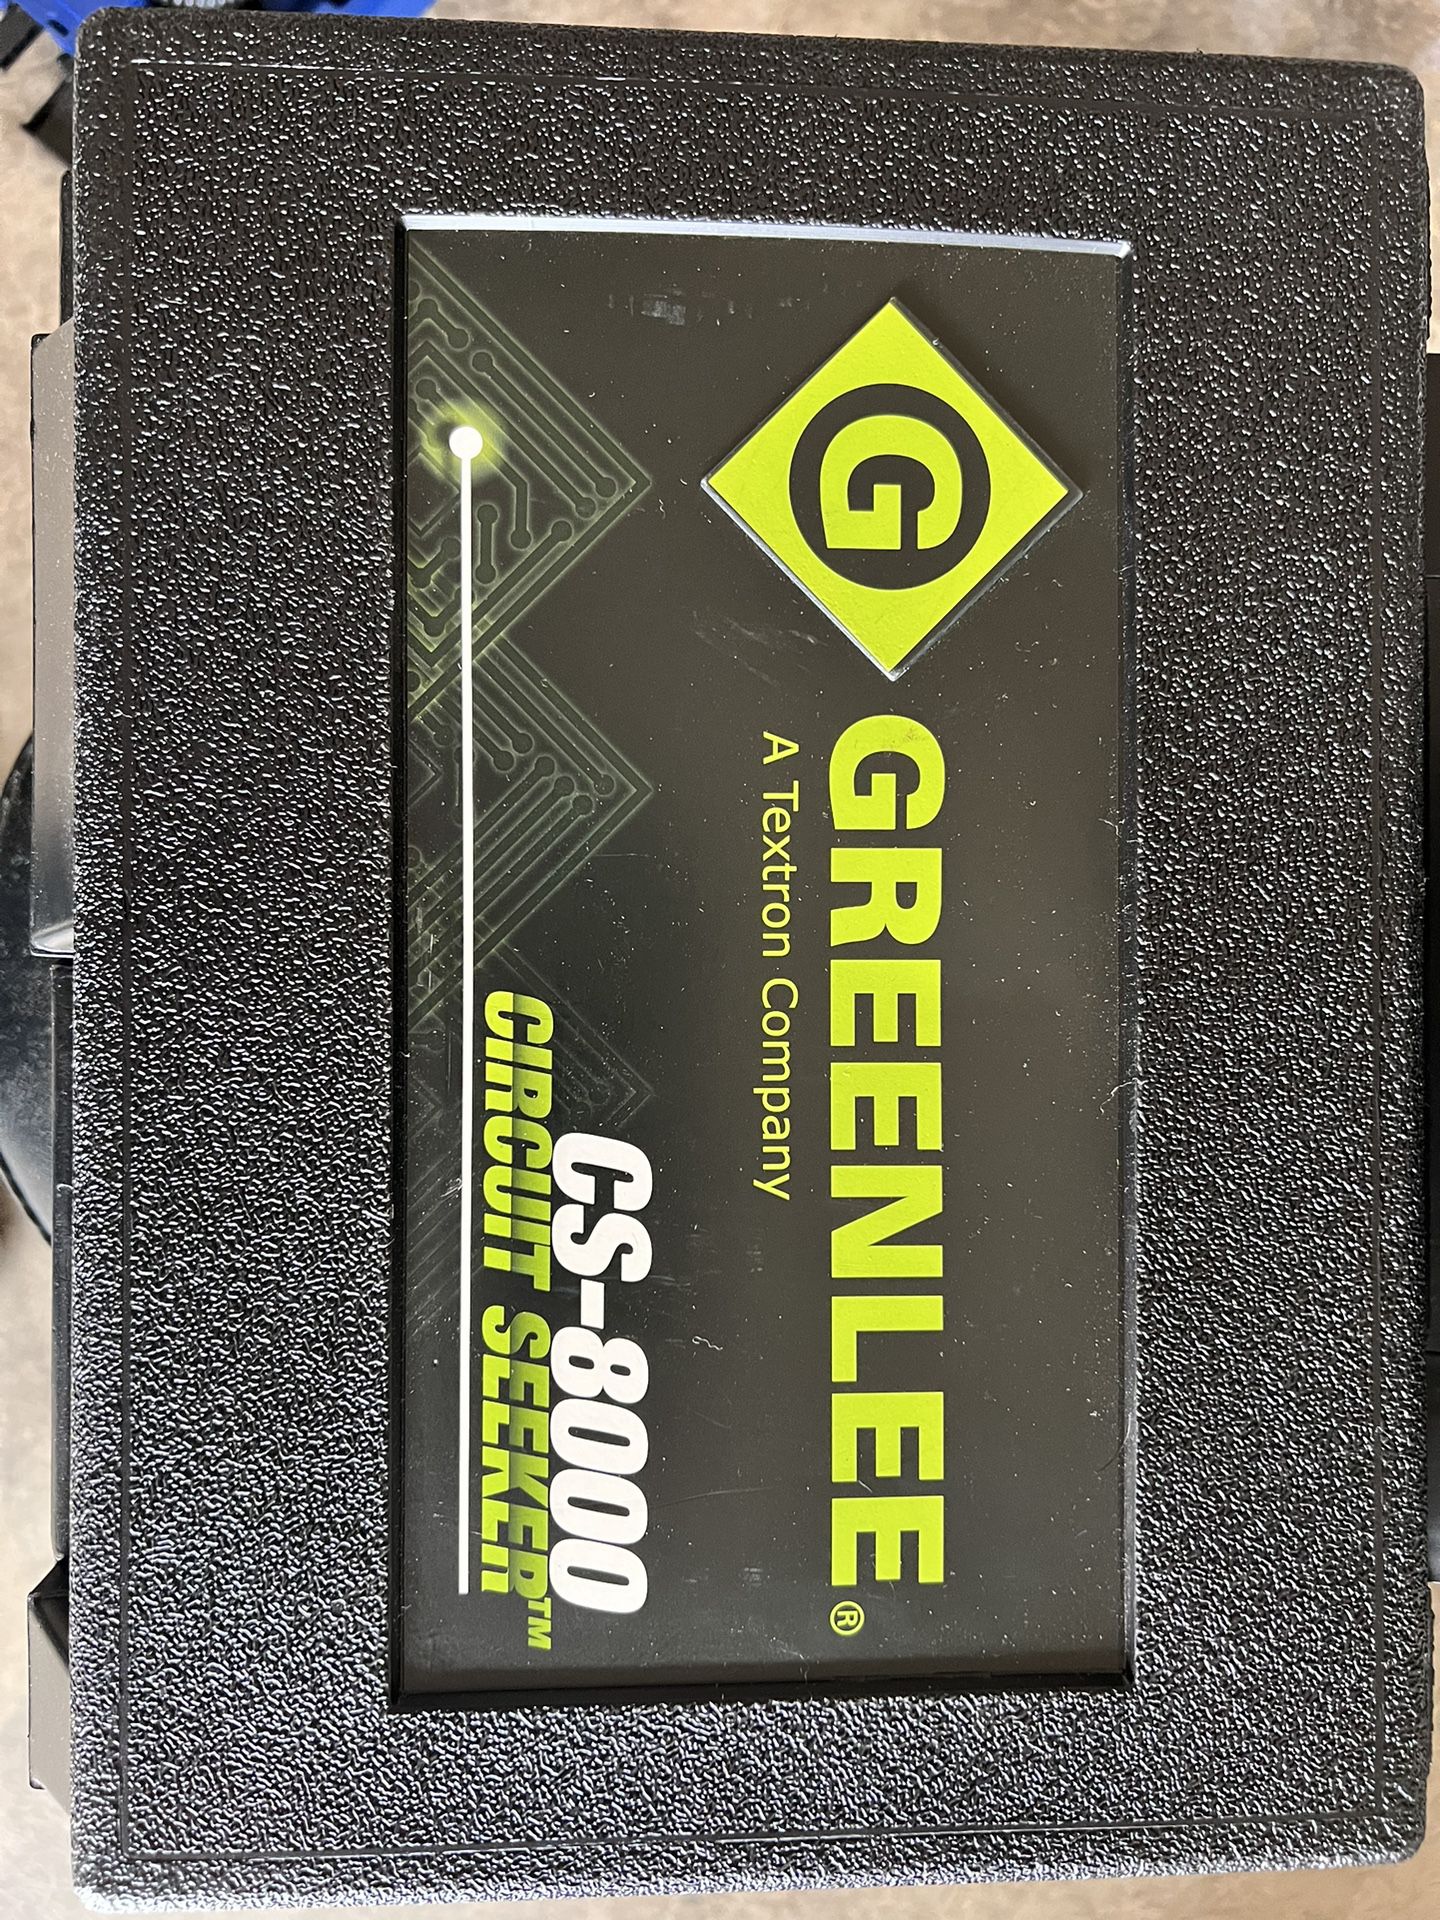 Greenlee CS-8000 / New- Never Used.*Clearance Price